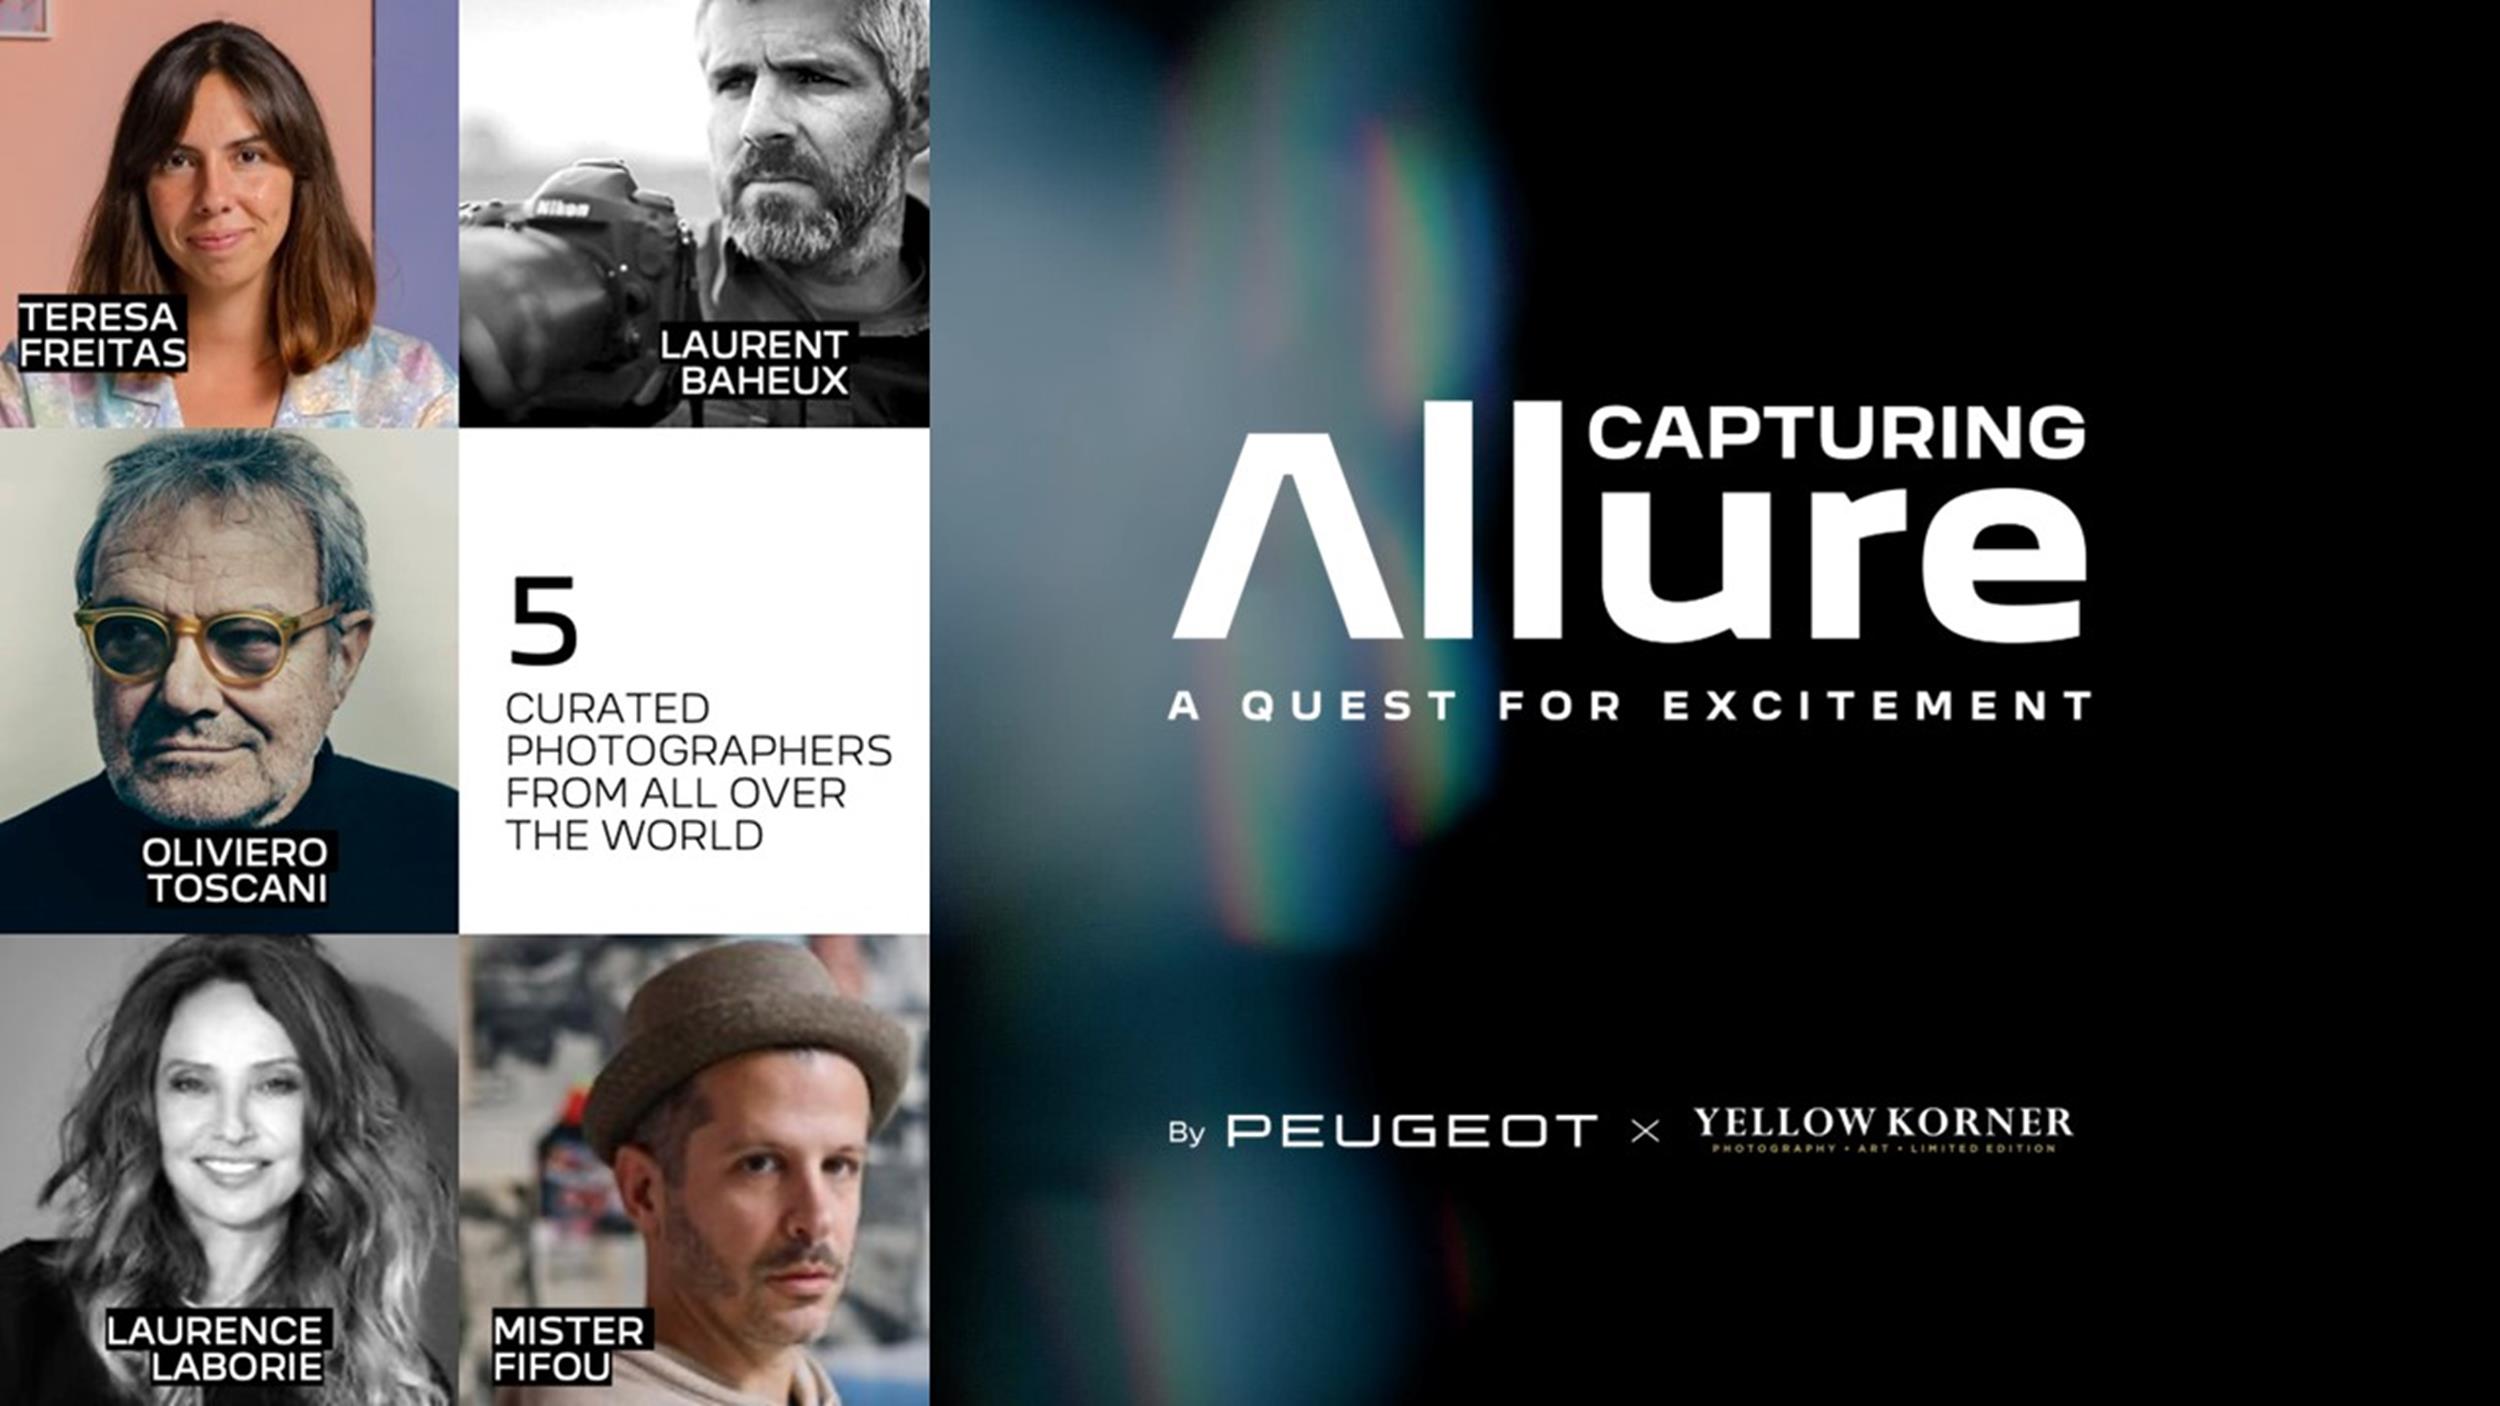 PEUGEOT and YellowKorner set five photographers in quest of Allure